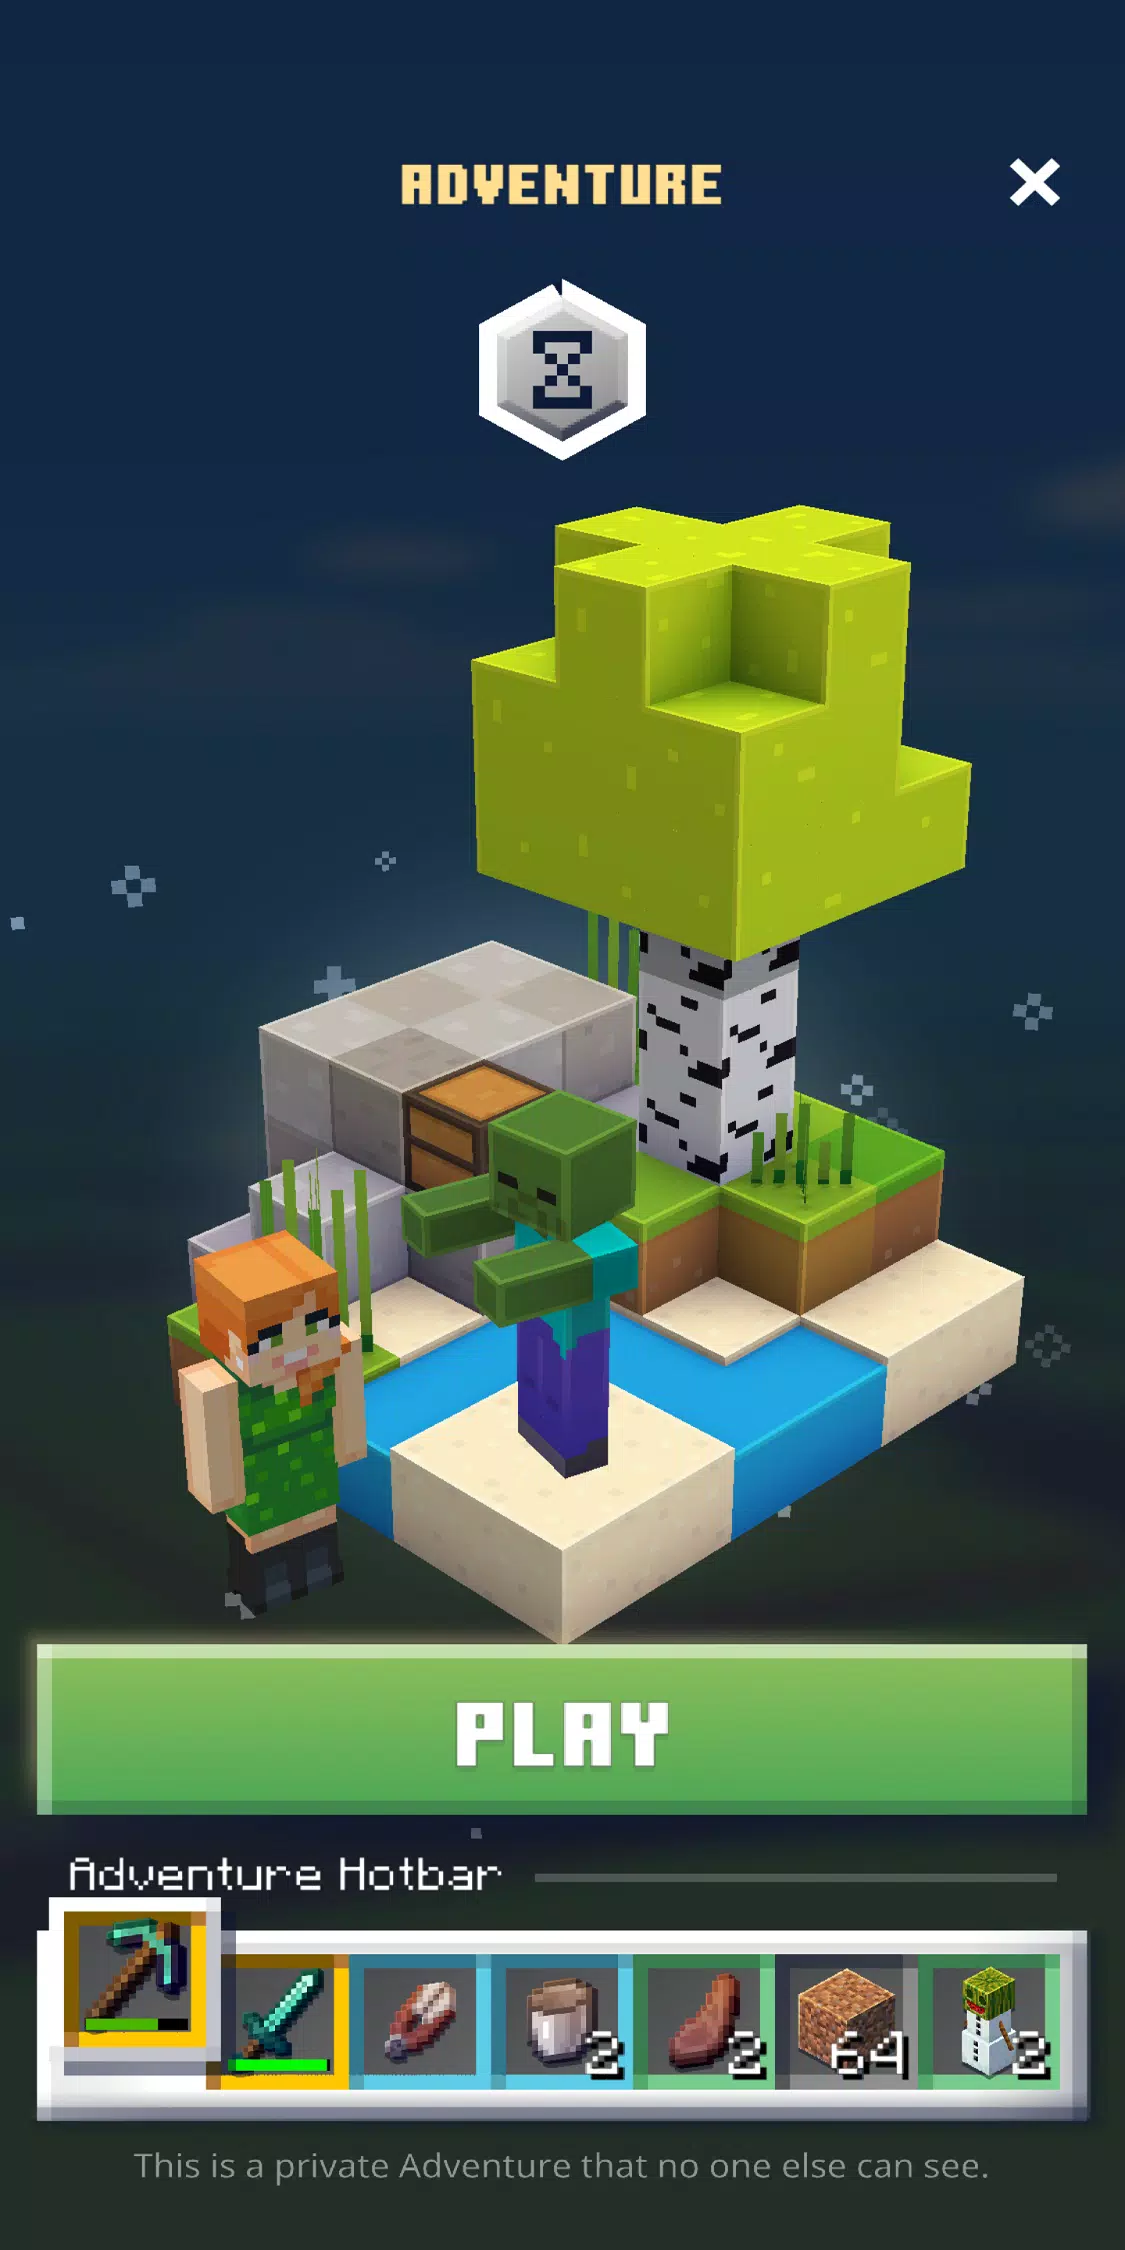 Download Minecraft Earth free for Android APK - CCM